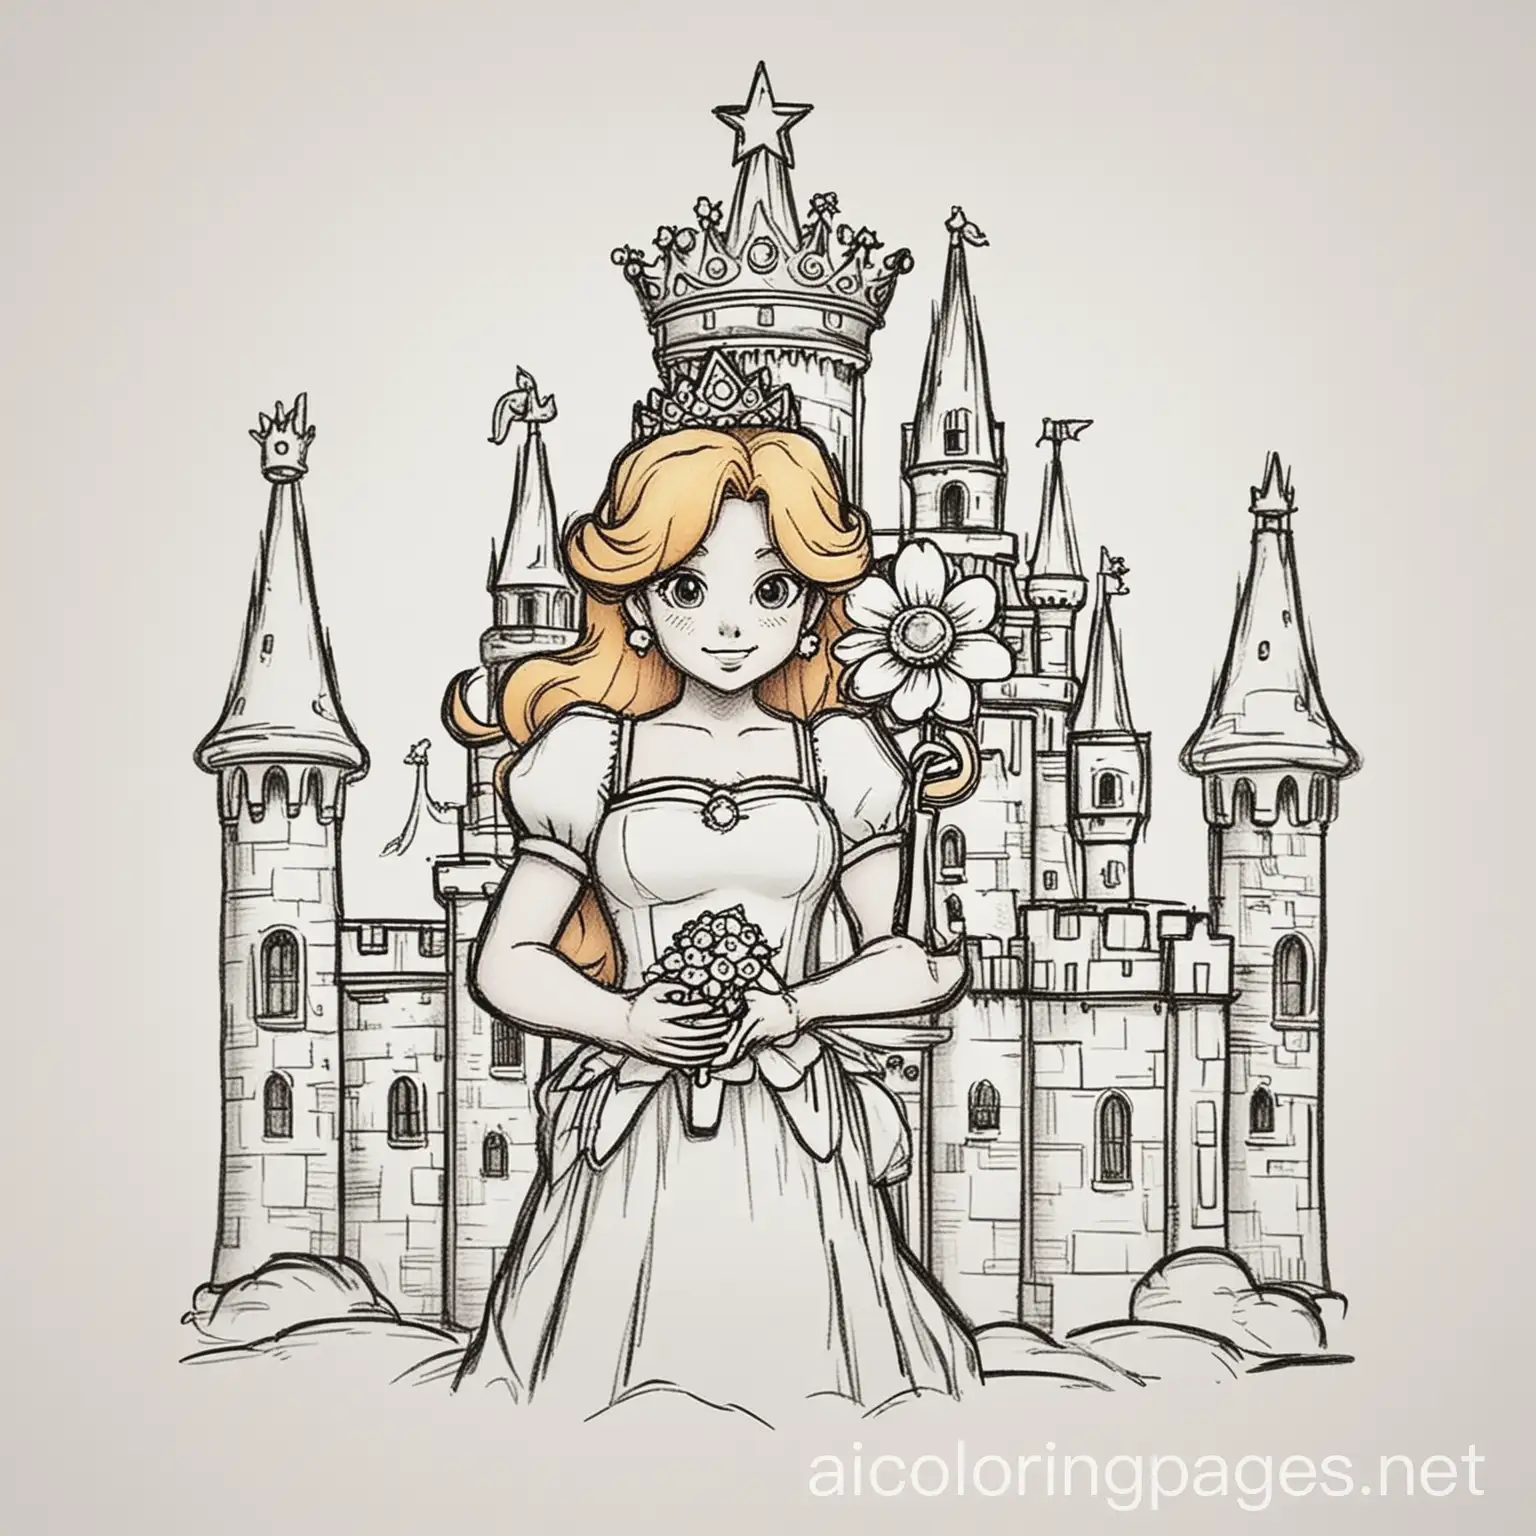 Princess-Peach-Daisy-and-Rosalina-Coloring-Page-with-Crown-Star-and-Daisy-Flower